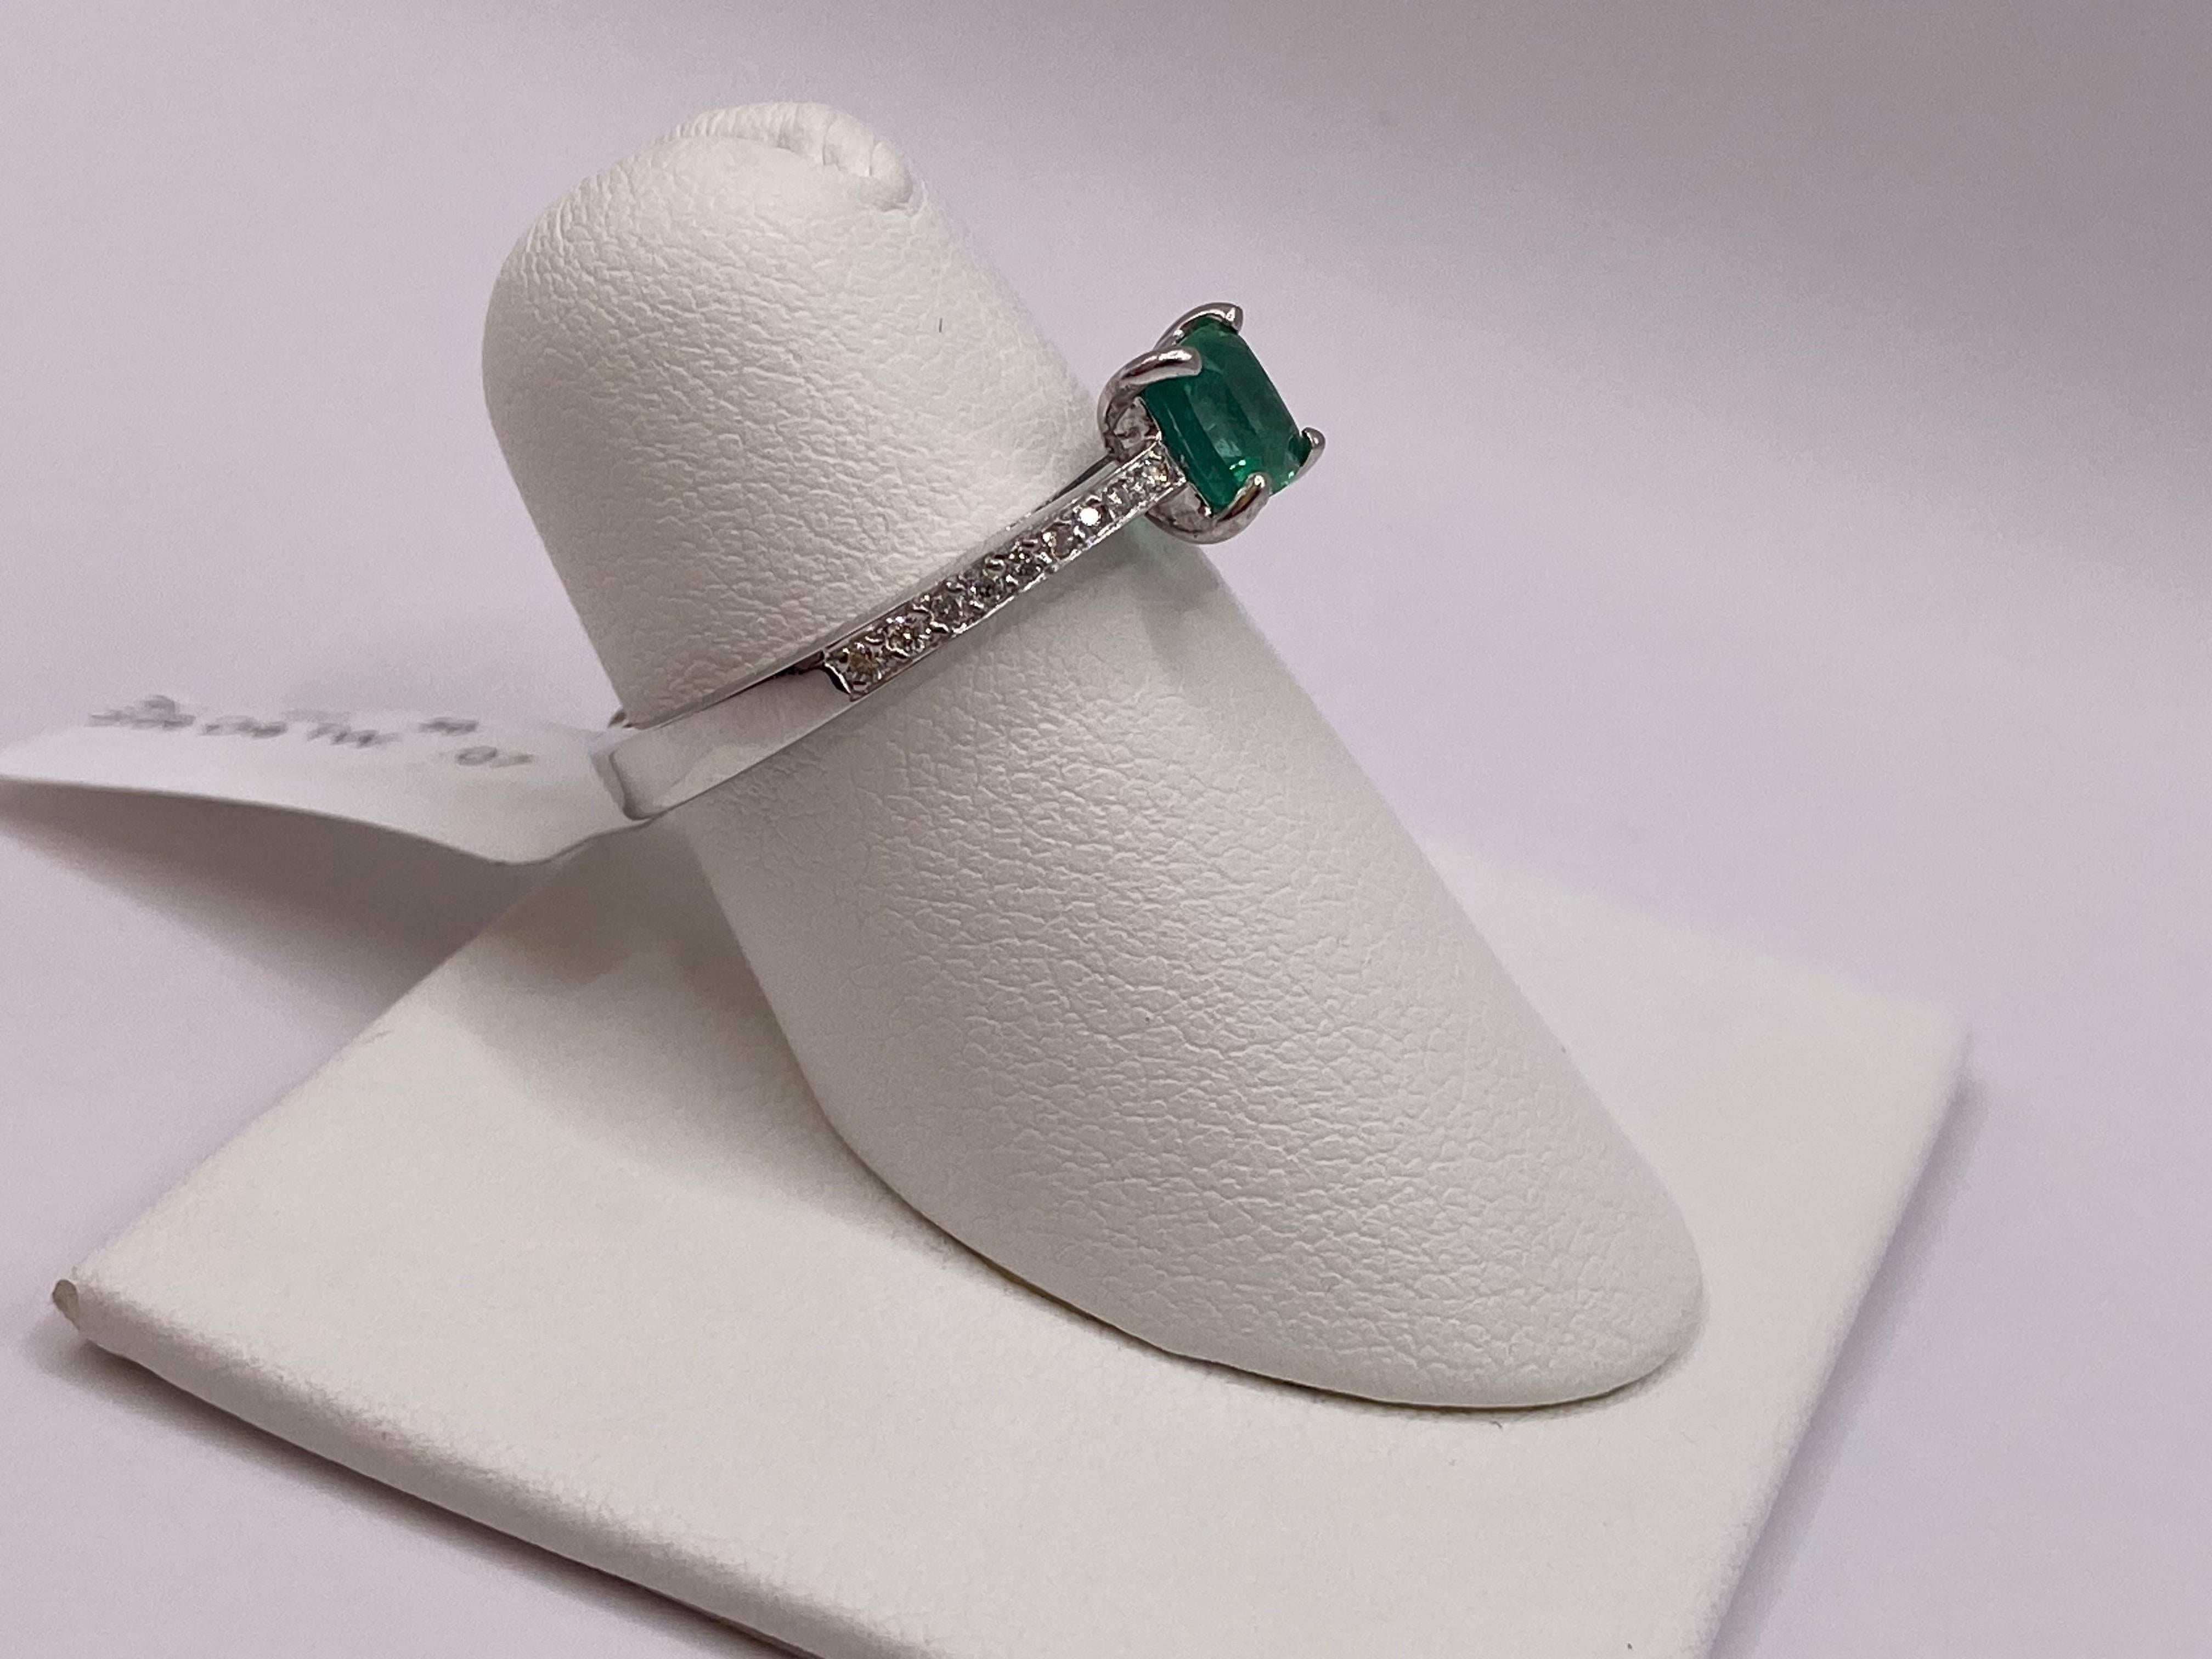 Metal: 14KT White Gold
Finger Size: 6.5
(Ring is size 6.5, but is sizable upon request)

Number of Cushion Emeralds: 1
Carat Weight: 0.50ctw
Stone Size: 5.2 x 5.0mm

Number of Round Diamonds: 18
Carat Weight: 0.07ctw